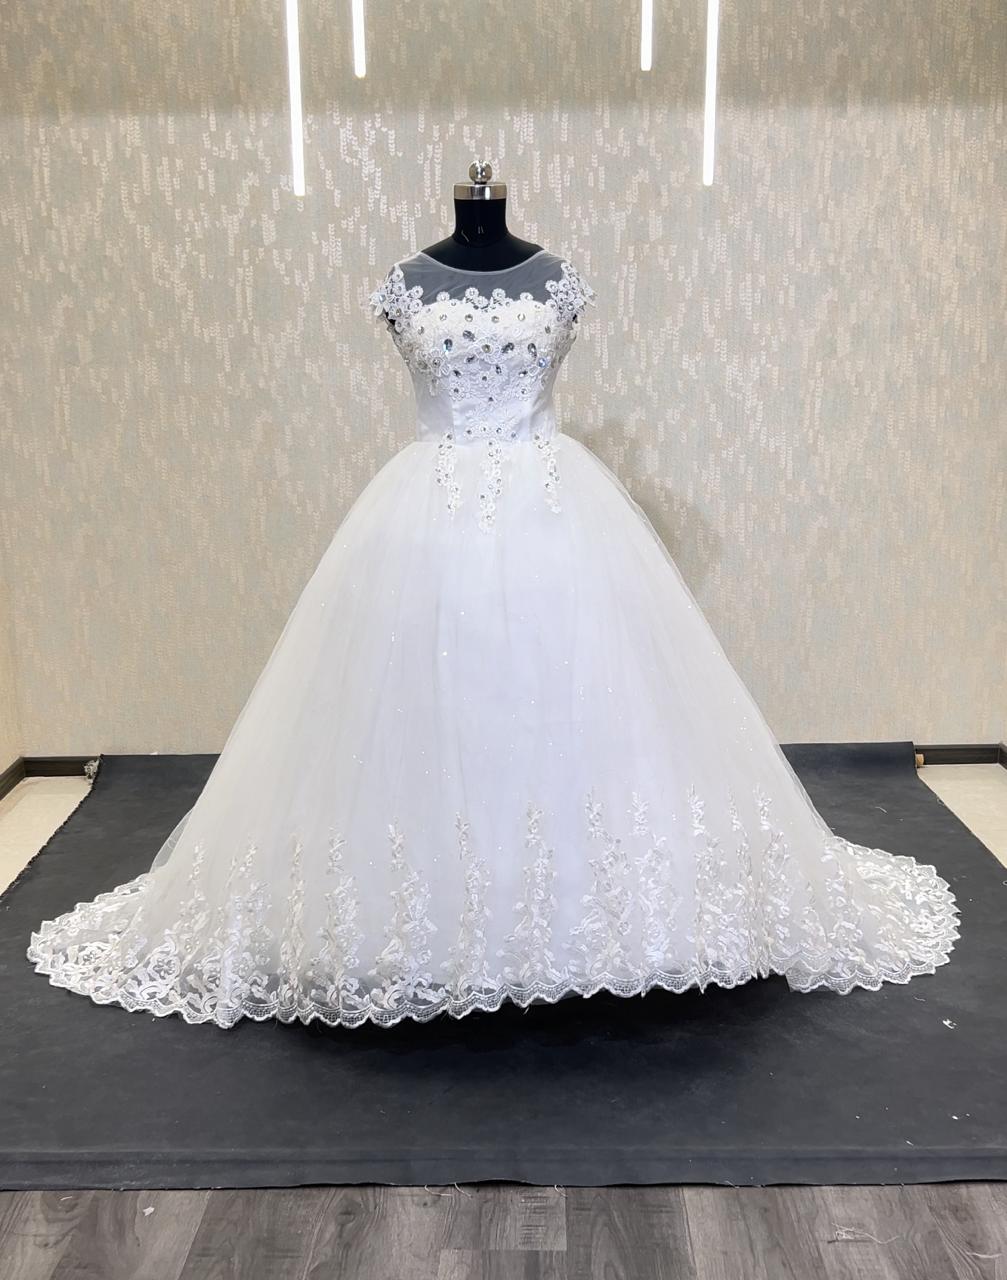 GownLink Stunning White Catholic Wedding Train Gown with Beaded Lace GLHMD16050083T